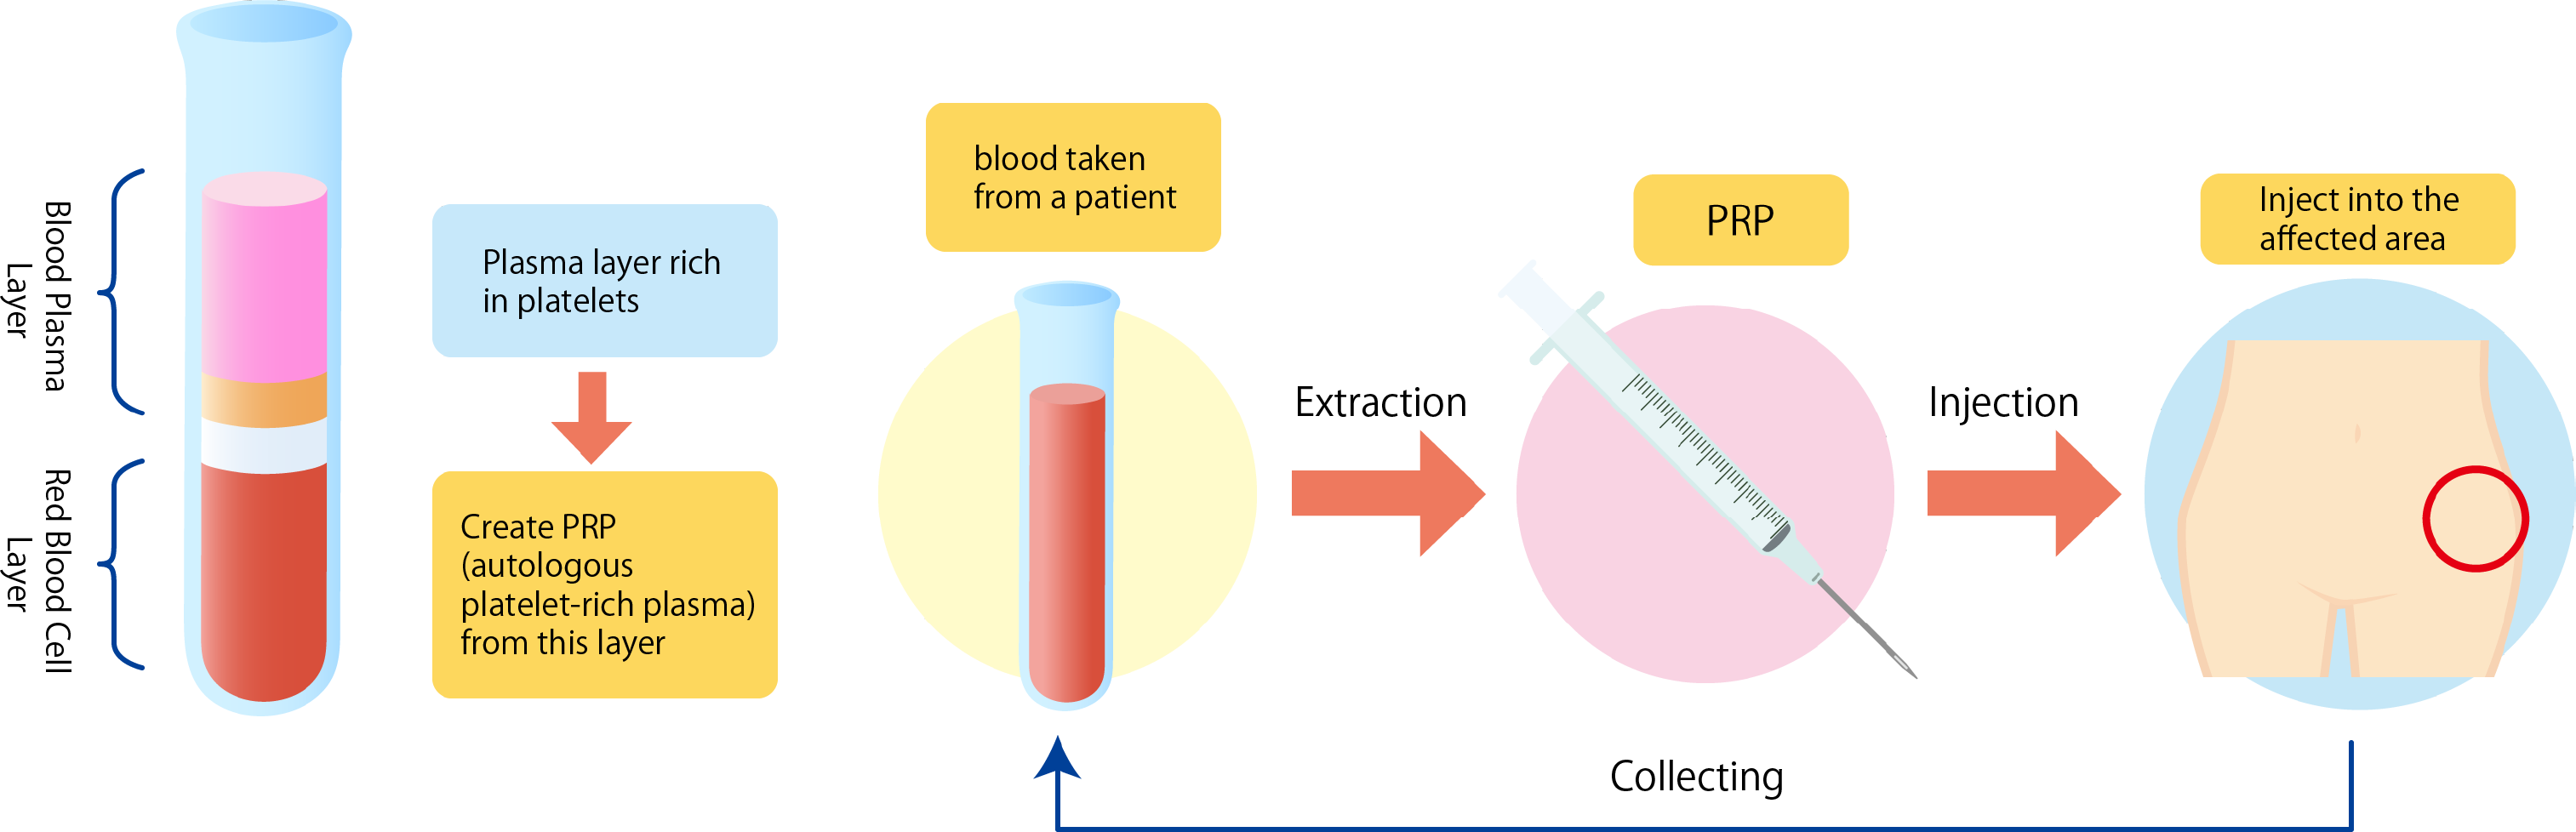 Principle of PRP Therapy